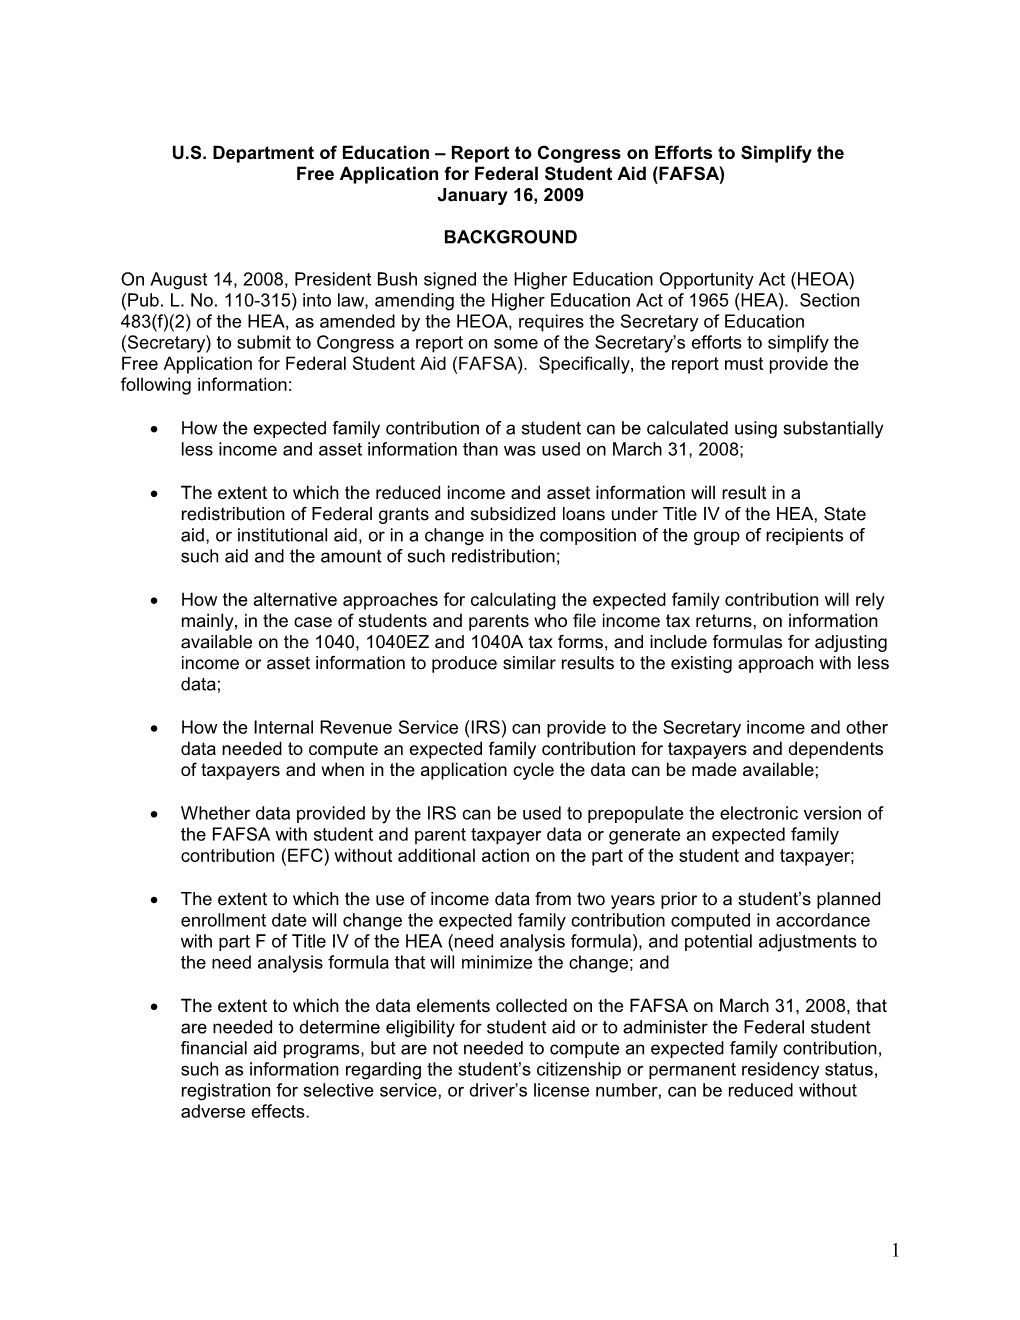 U.S. Department of Education Report to Congress on Efforts to Simplify The